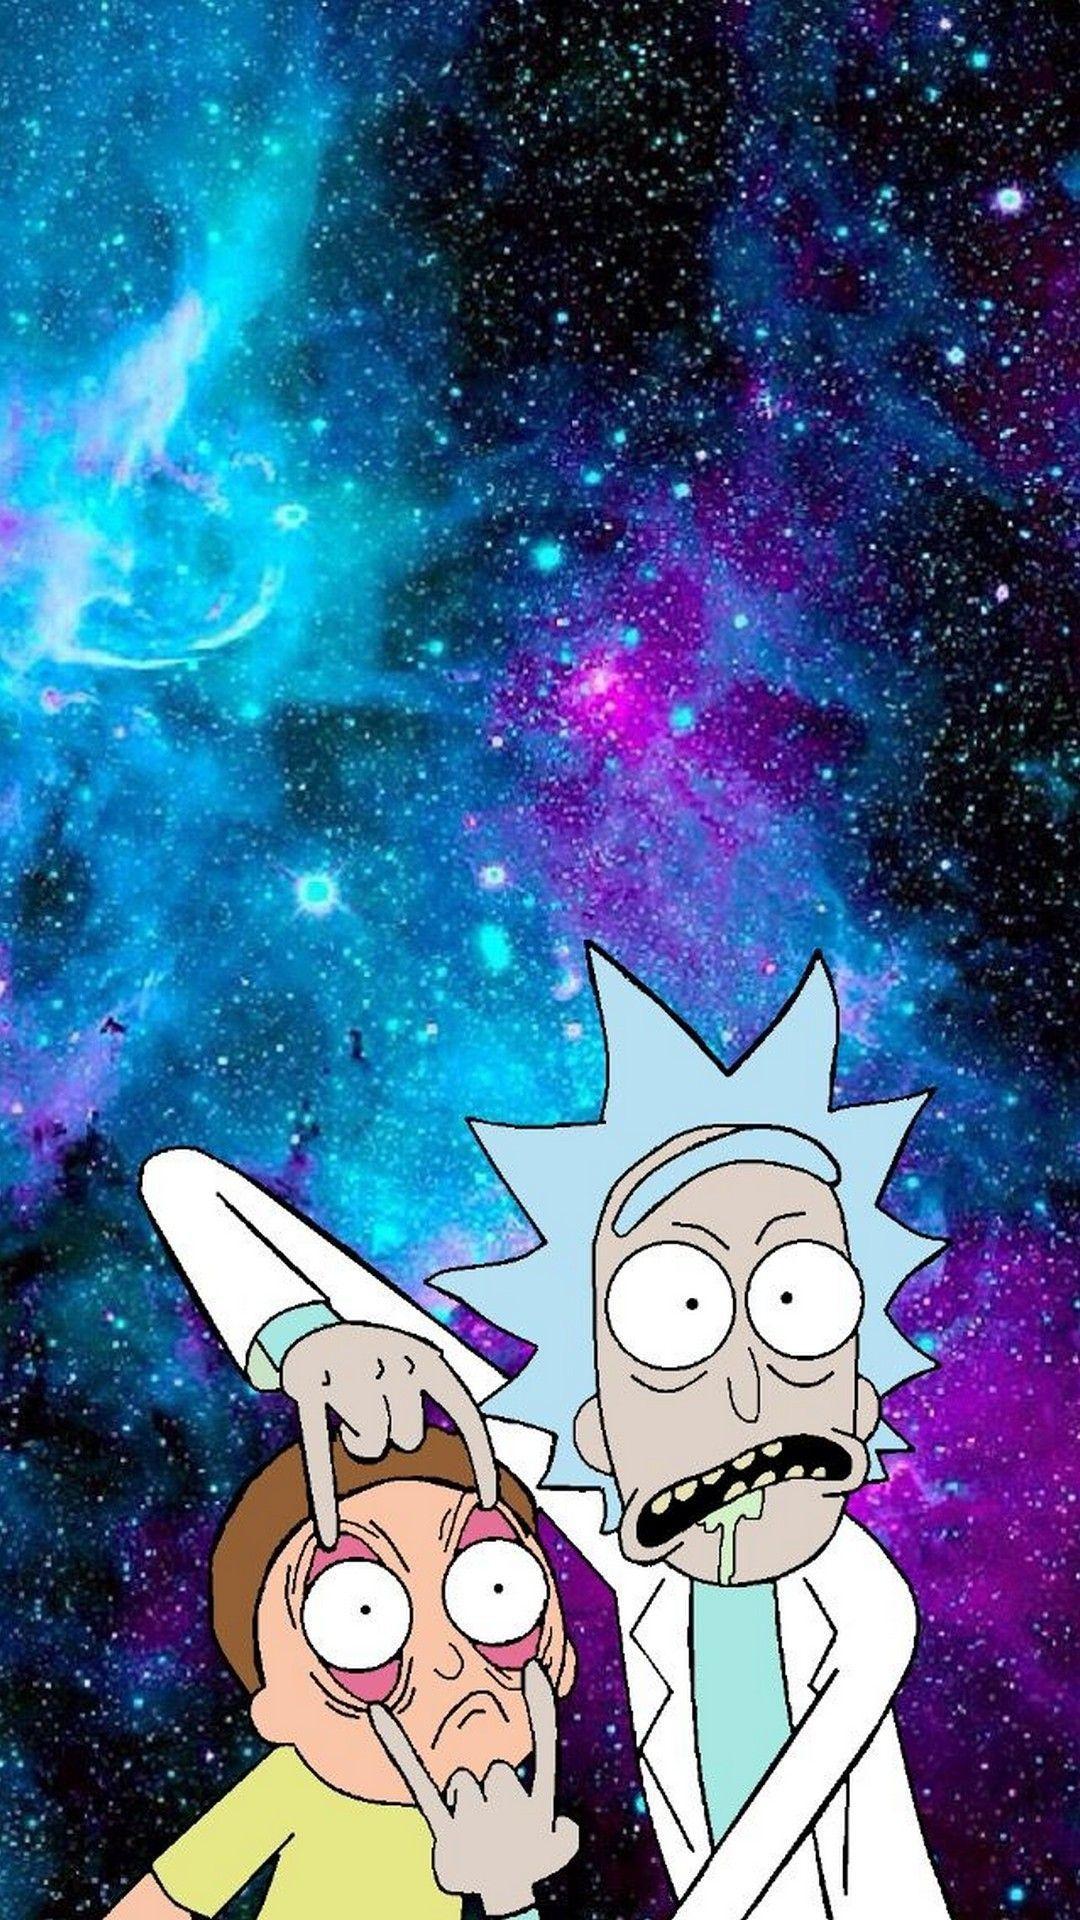 Rick and Morty Stoner Wallpapers - Top Free Rick and Morty Stoner